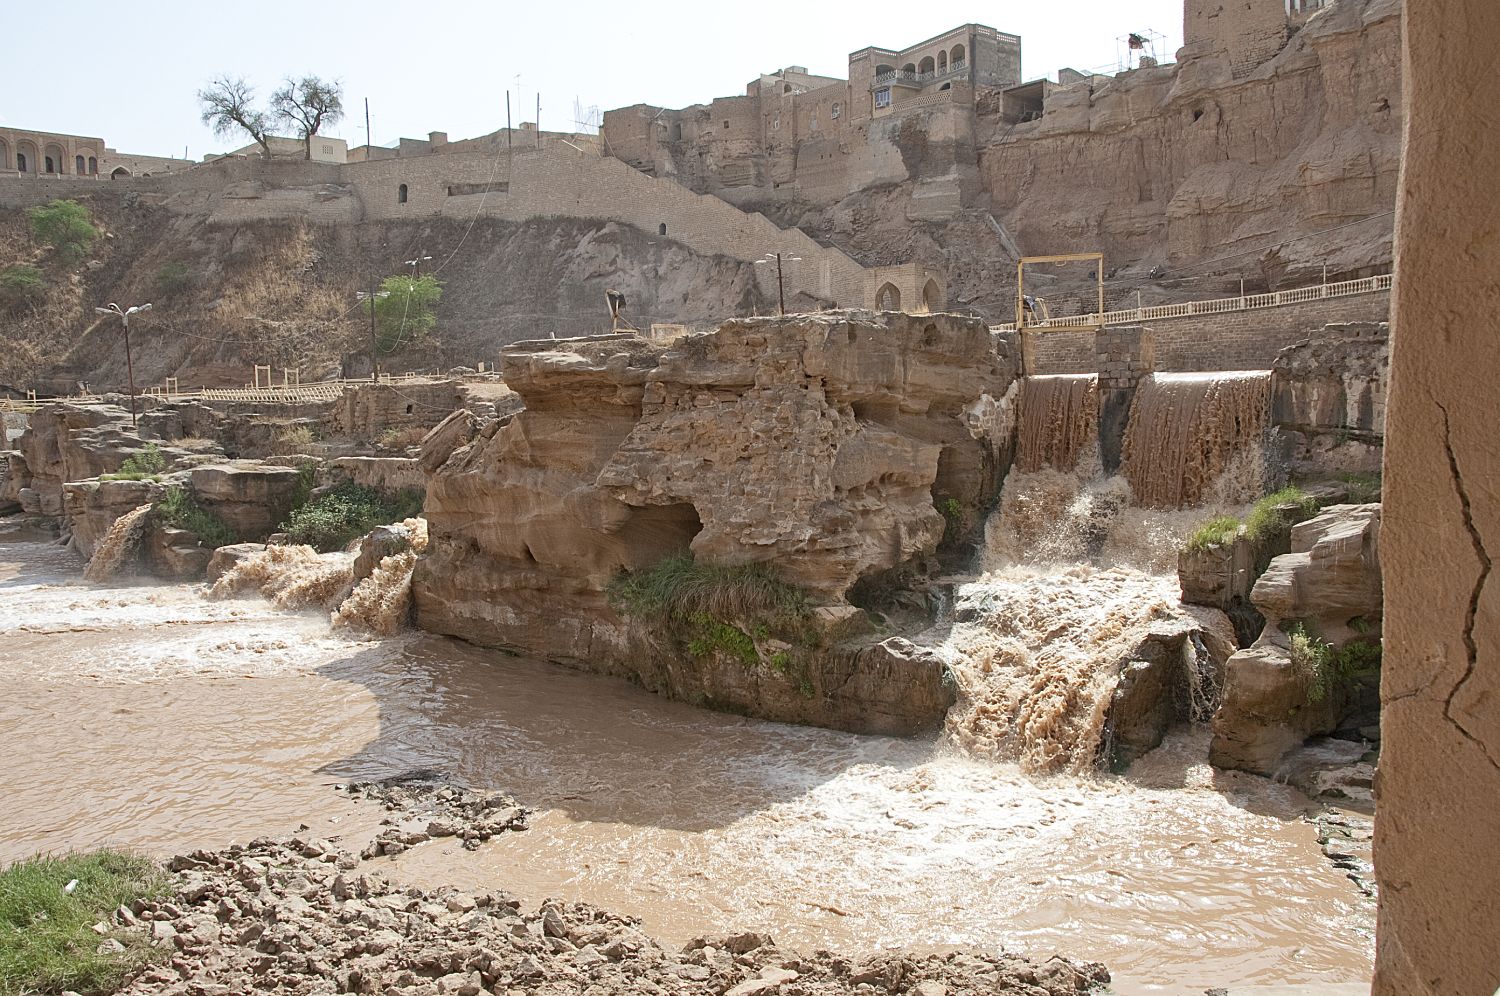 Asyabha-i Shushtar - View of waterfalls below pool on right (west) bank of canal.